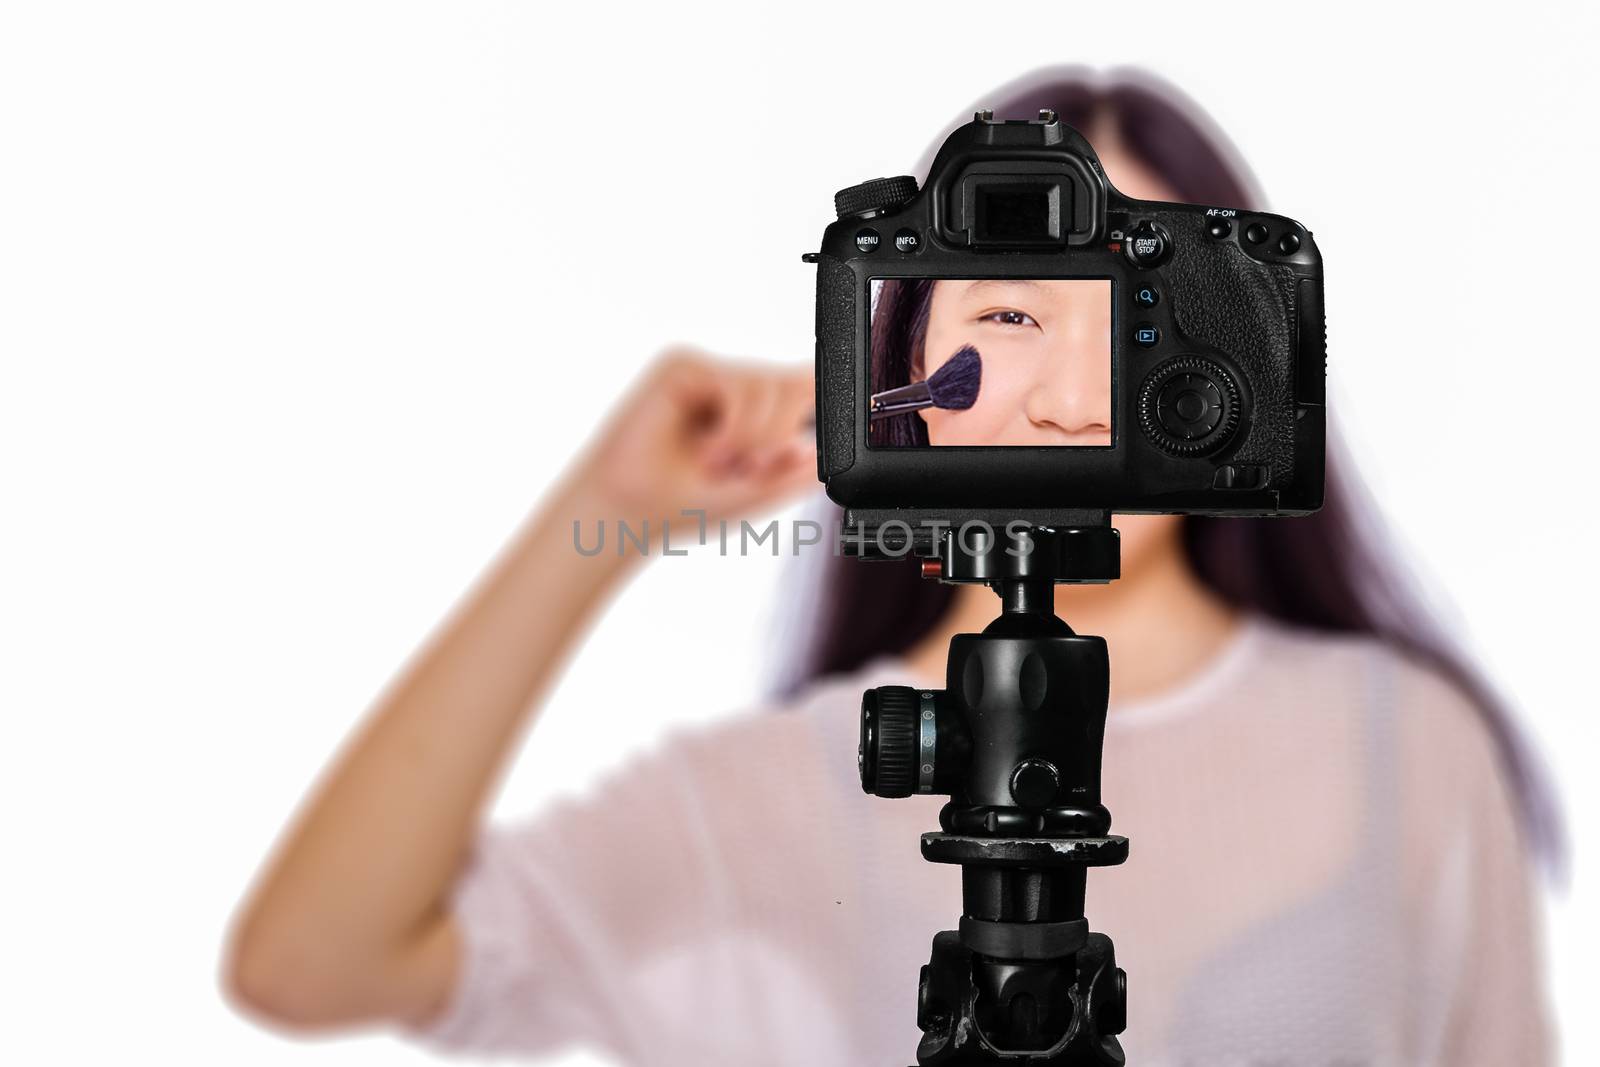 Focus on live view on camera on tripod, teenage girl  using cosmetics image on back screen with blurred scene in background. Teenage vlogger livestreaming show concept